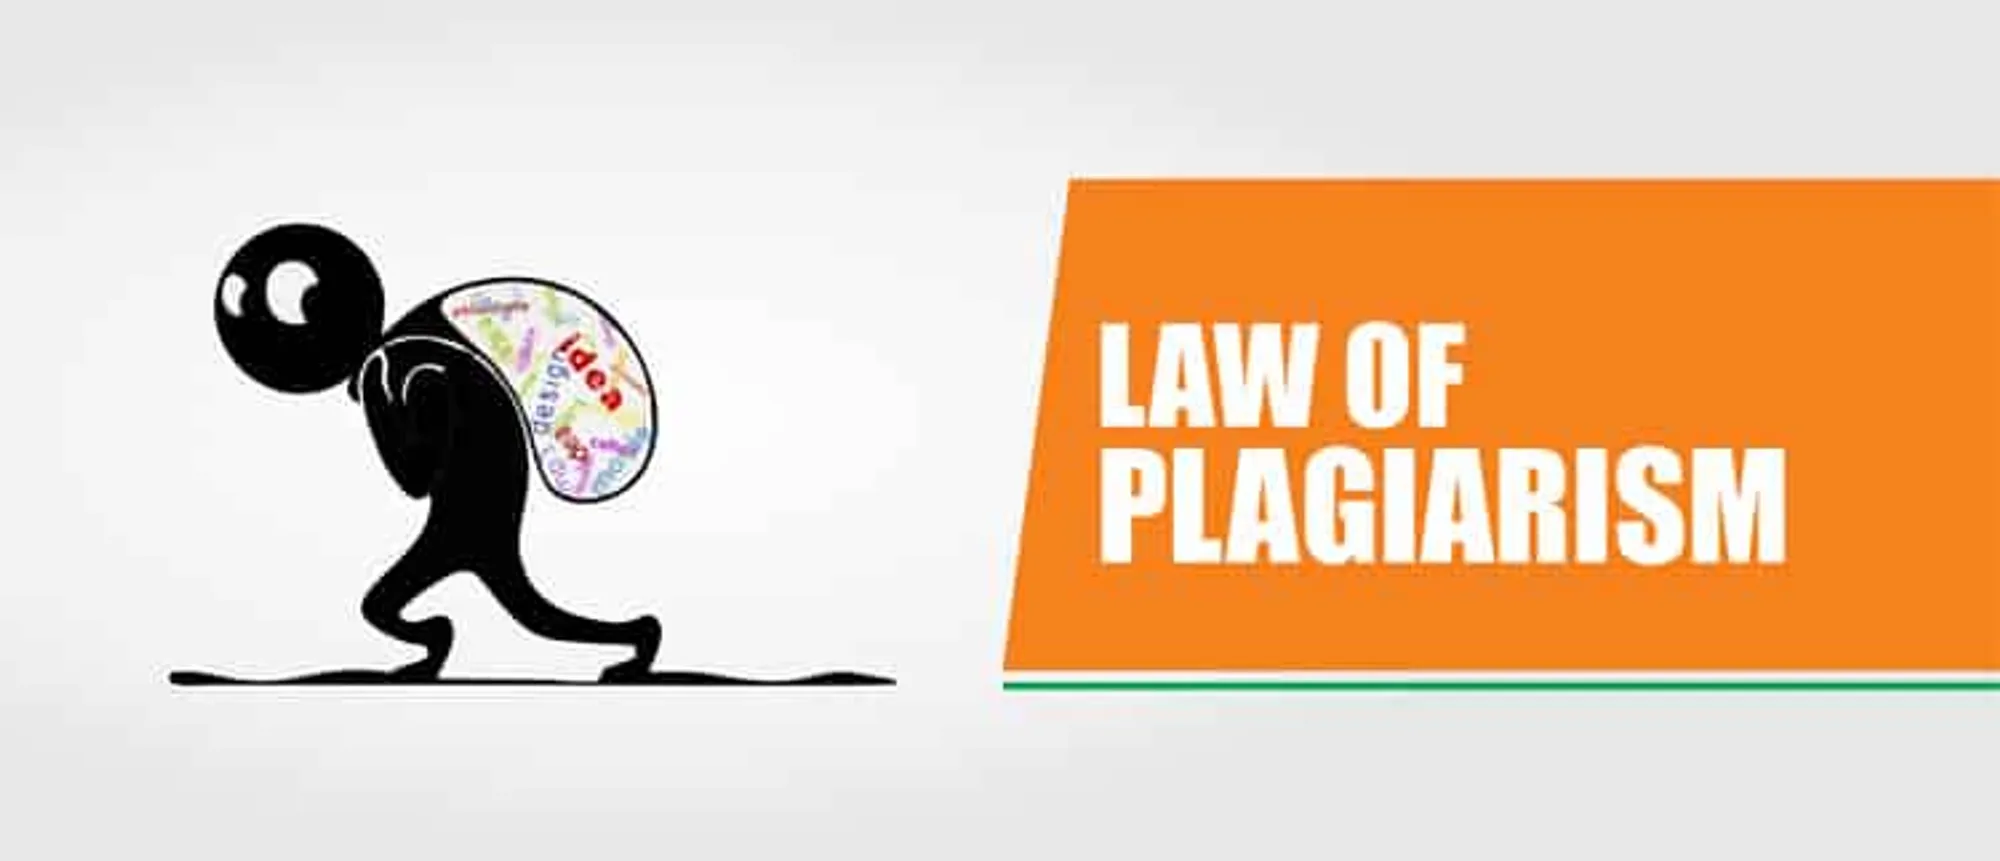 Law of Plagiarism in India